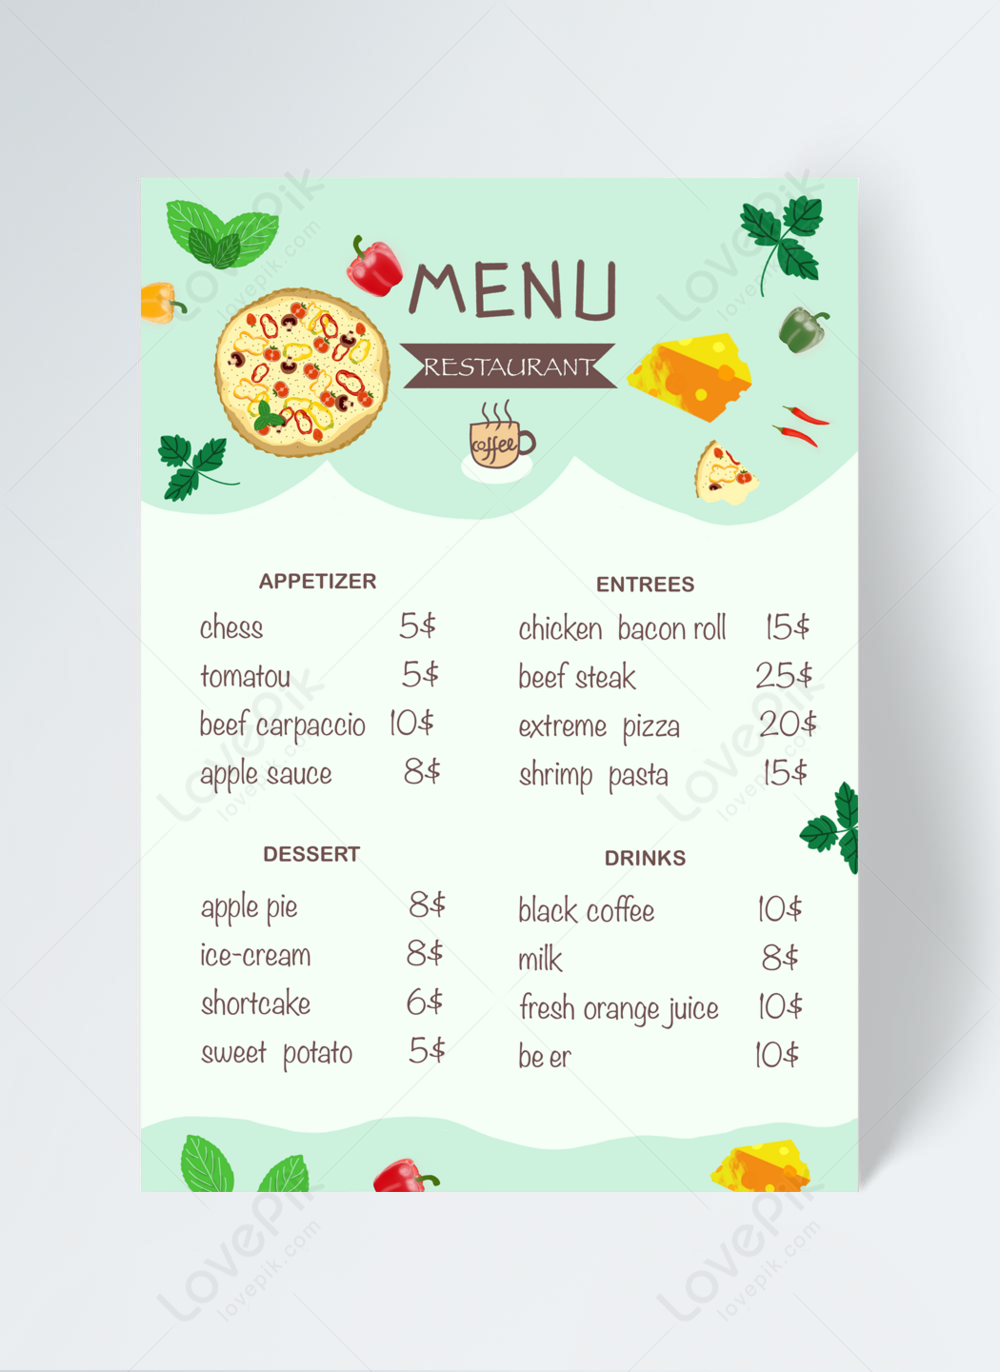 Cartoon style restaurant menu m template image_picture free download  